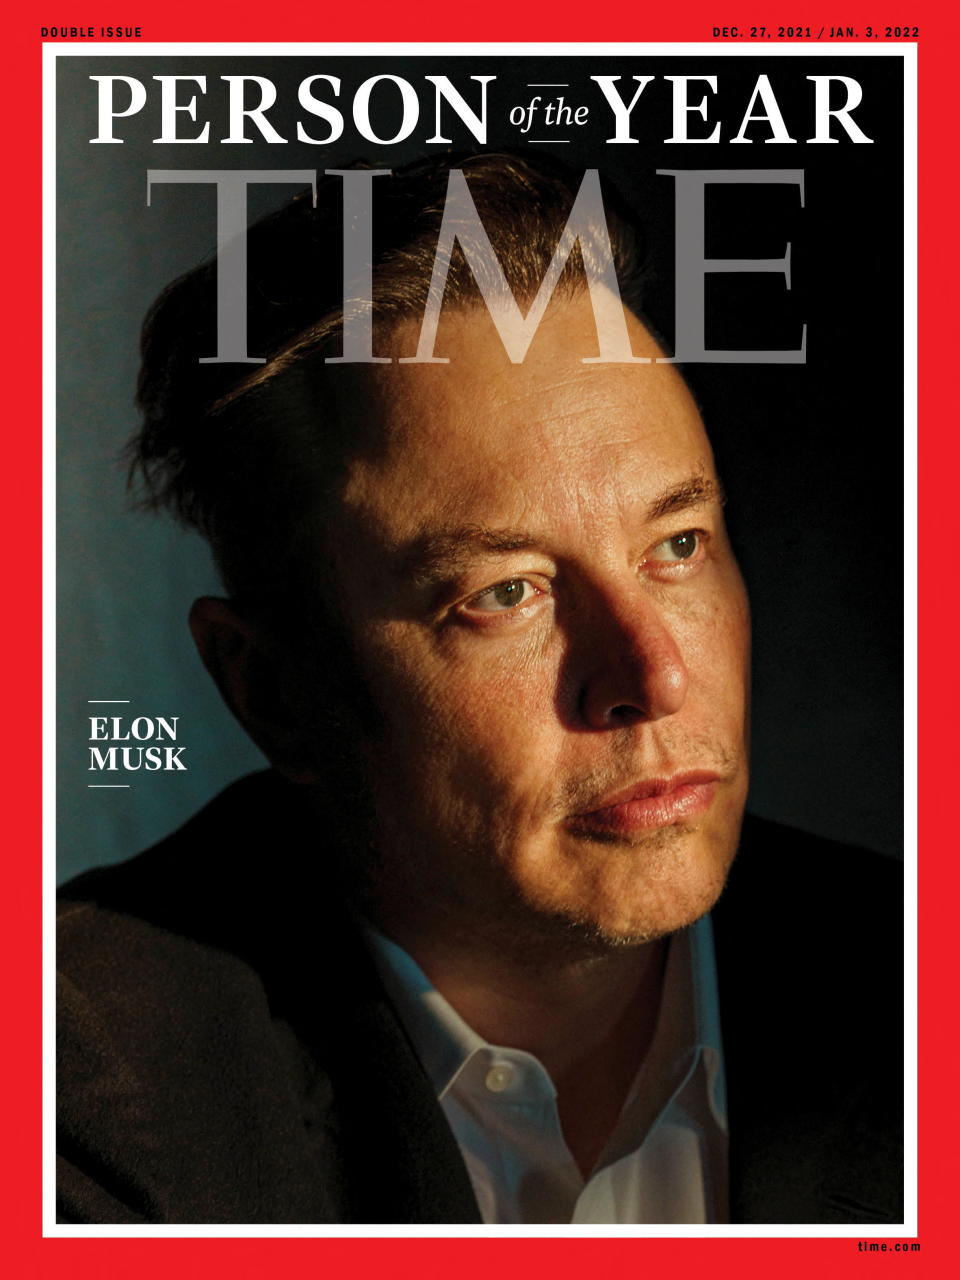 Elon Musk, founder and CEO of SpaceX and Tesla, on the cover of Time magazine's 2021 